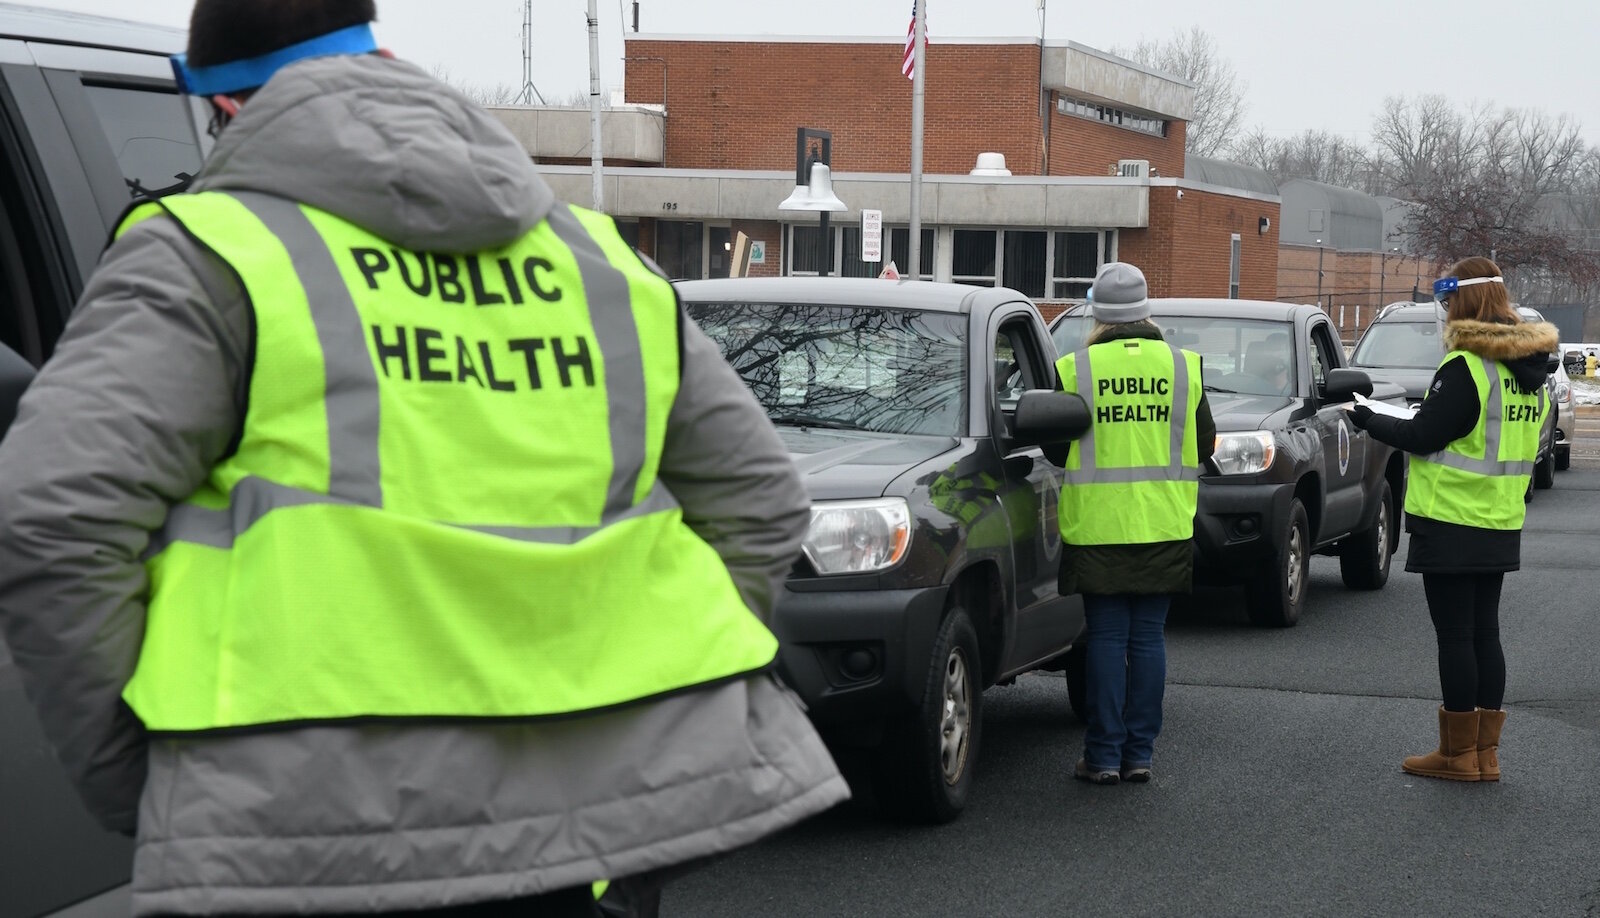 Calhoun County Health Department employees ask questions of people lined up then their vehicles prior to giving them a dose of Pfizer/BioNTech COVID-19 vaccine in Battle Creek Friday morning. 